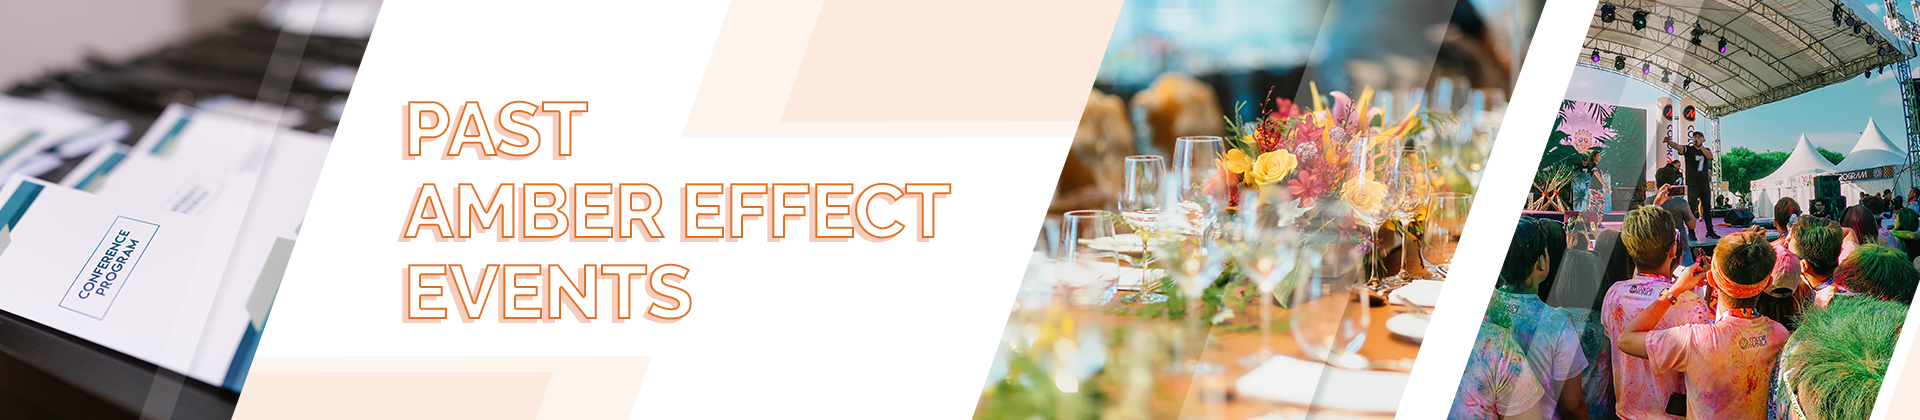 Past Amber Effect Events banner with corporate and community event images